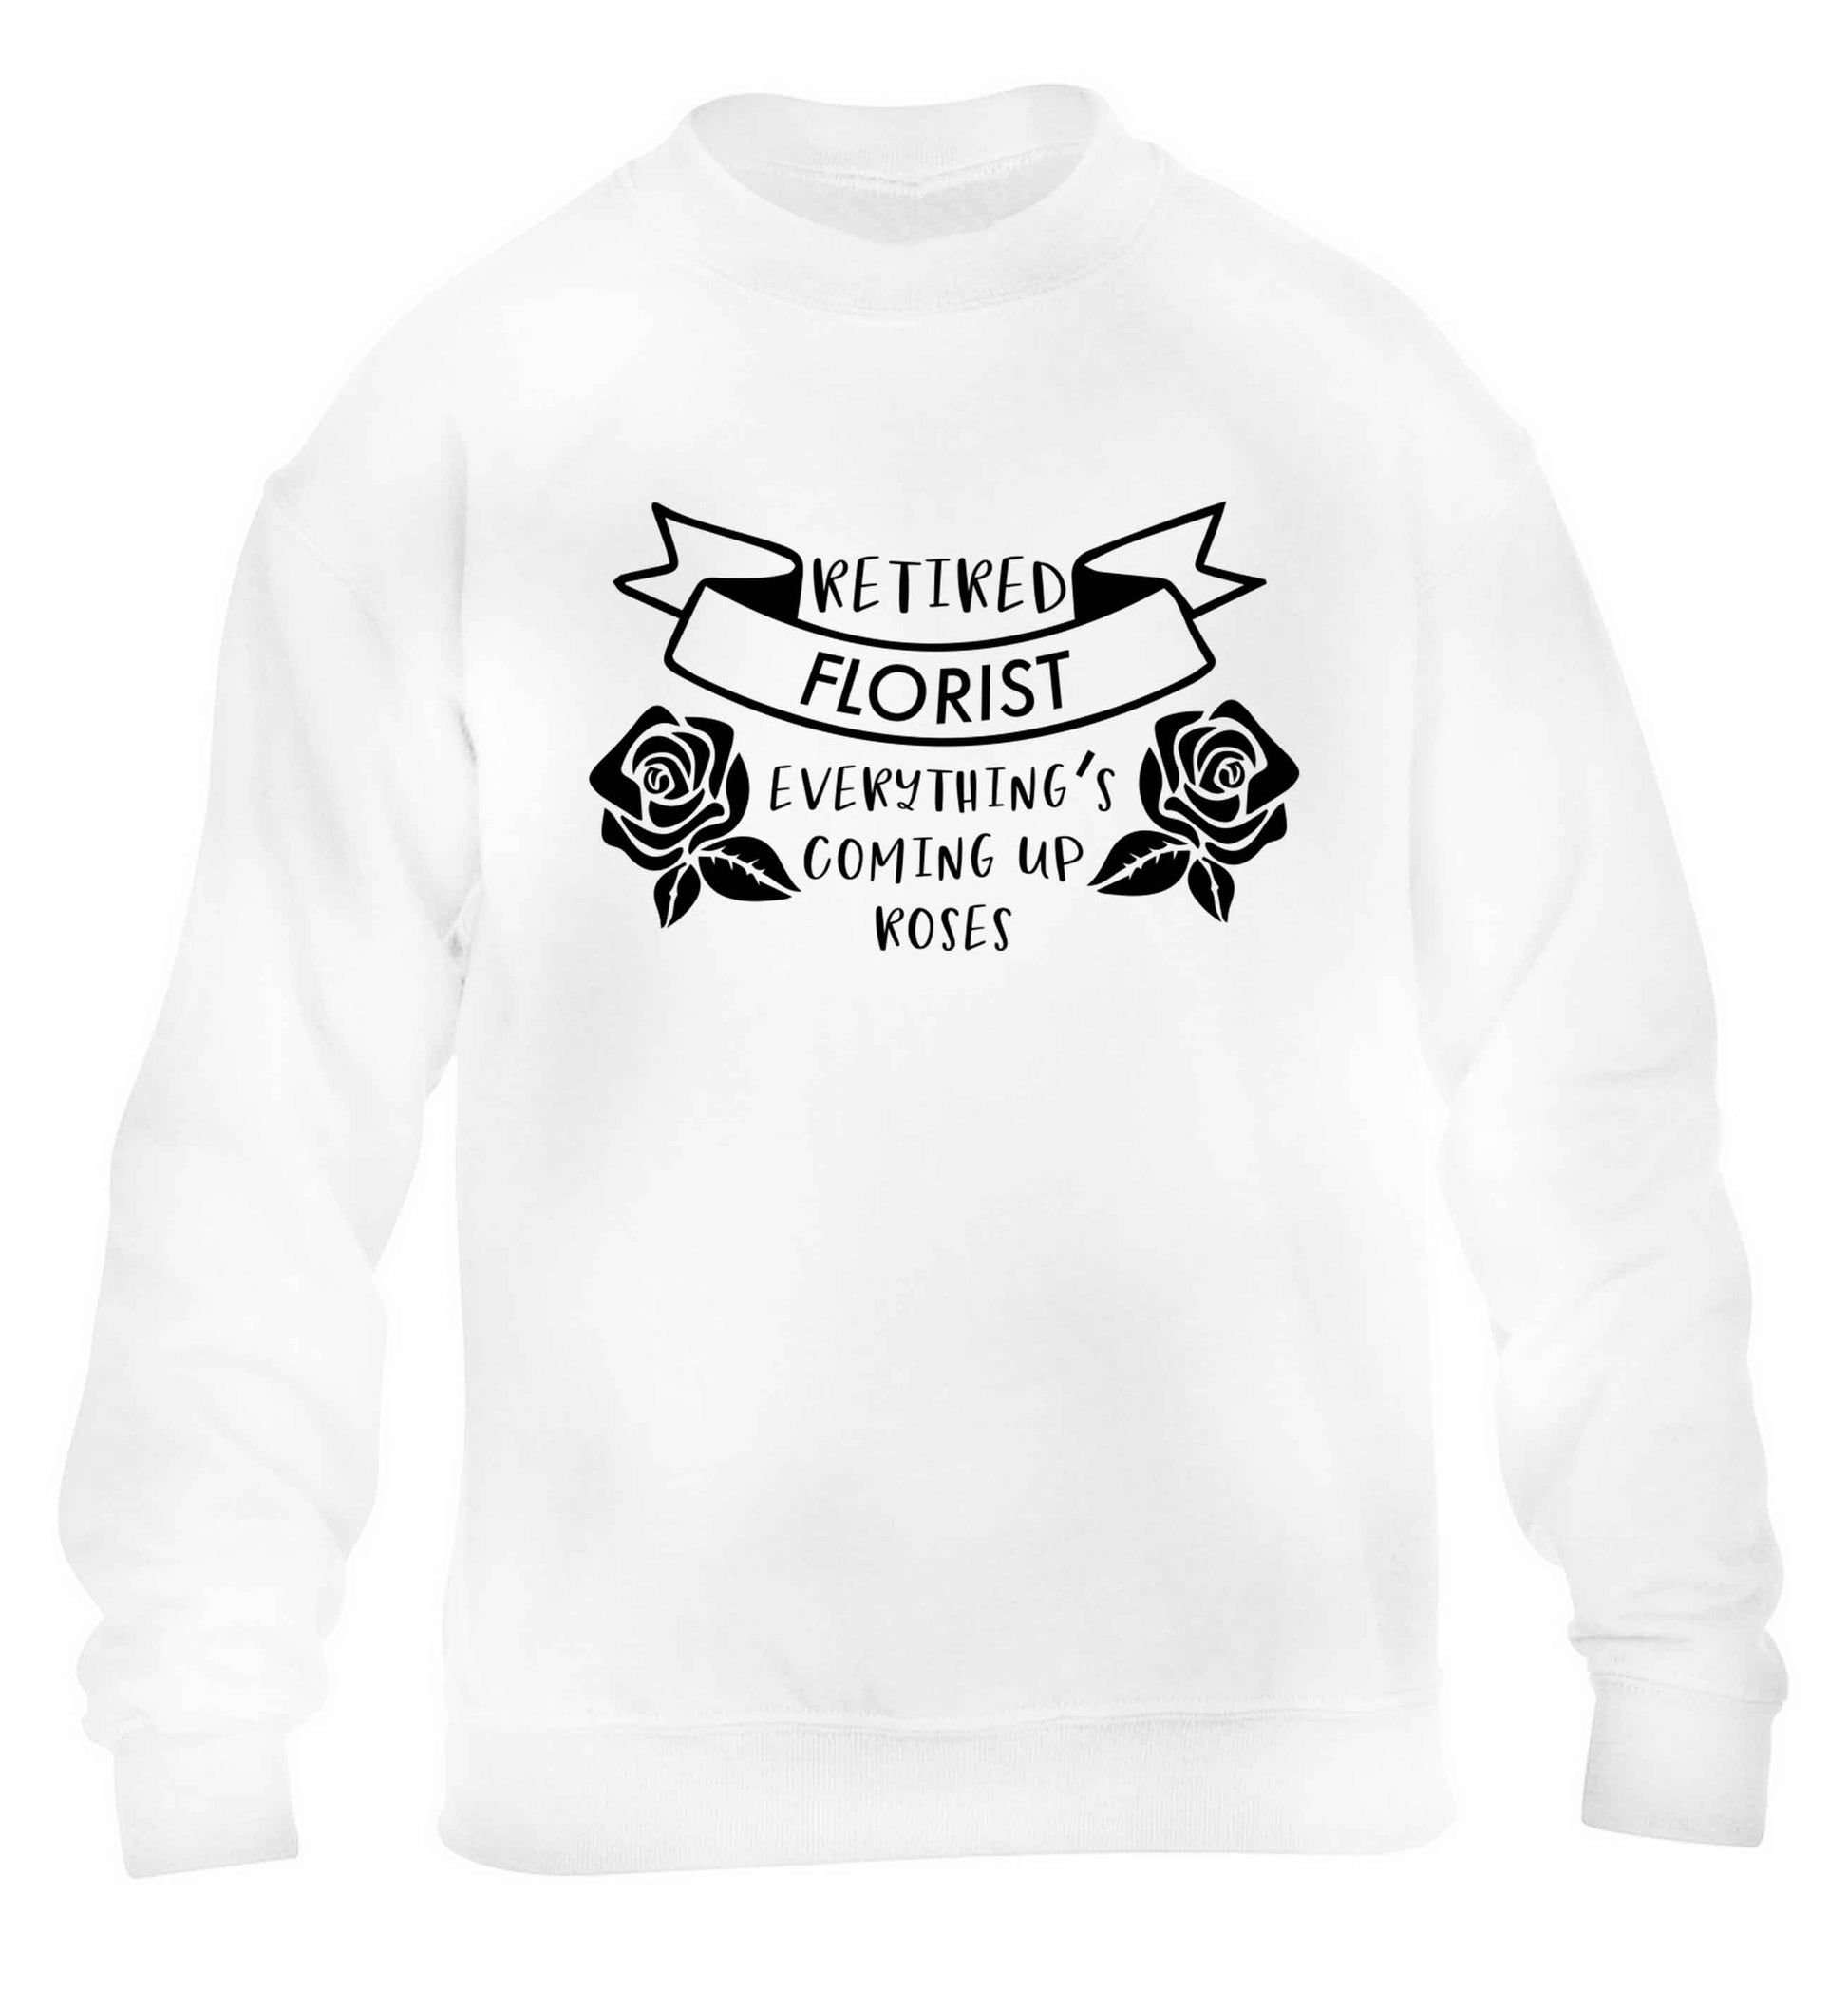 Retired florist everything's coming up roses children's white sweater 12-13 Years